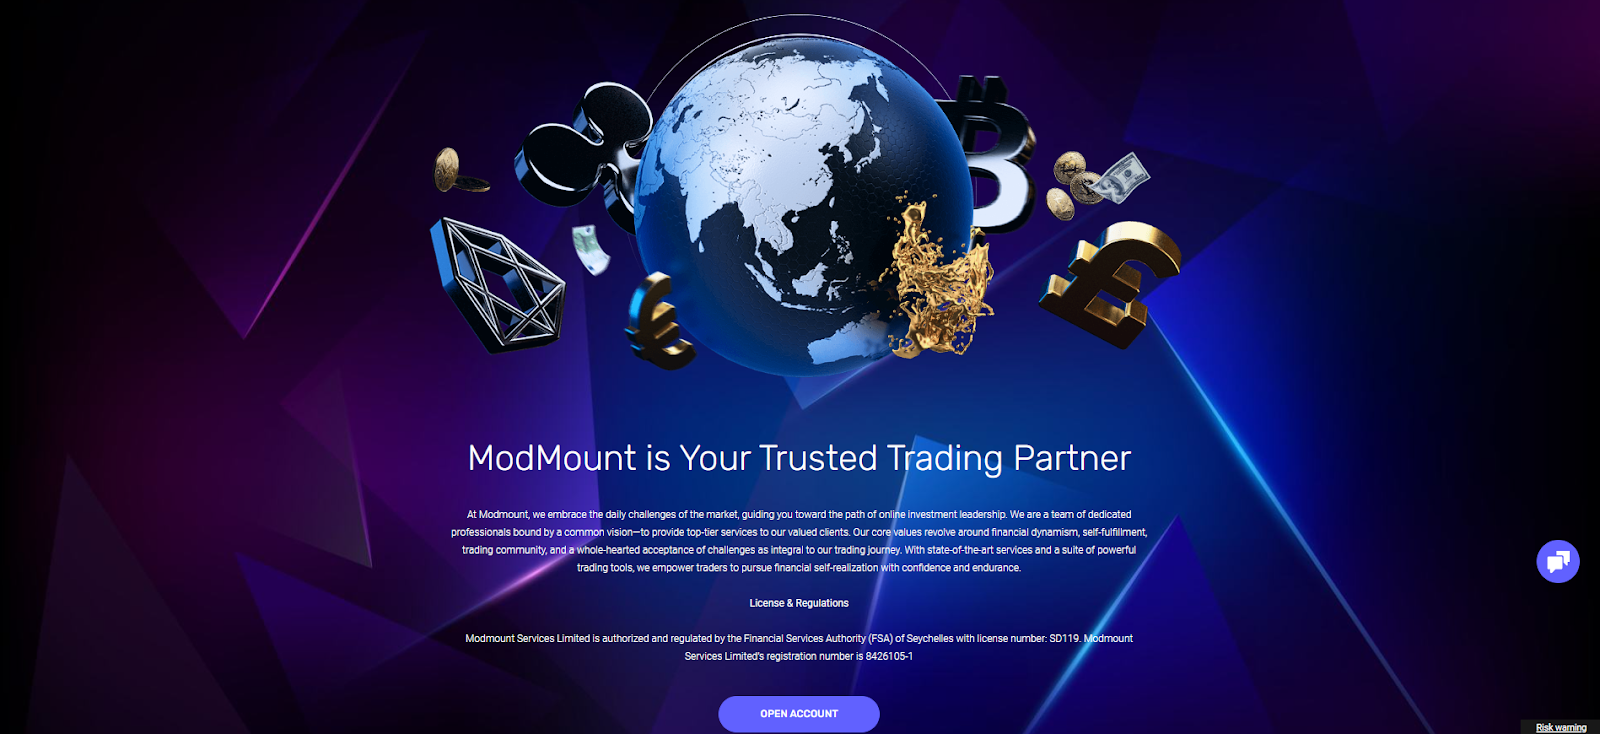 Follow the link and check more information about modmount